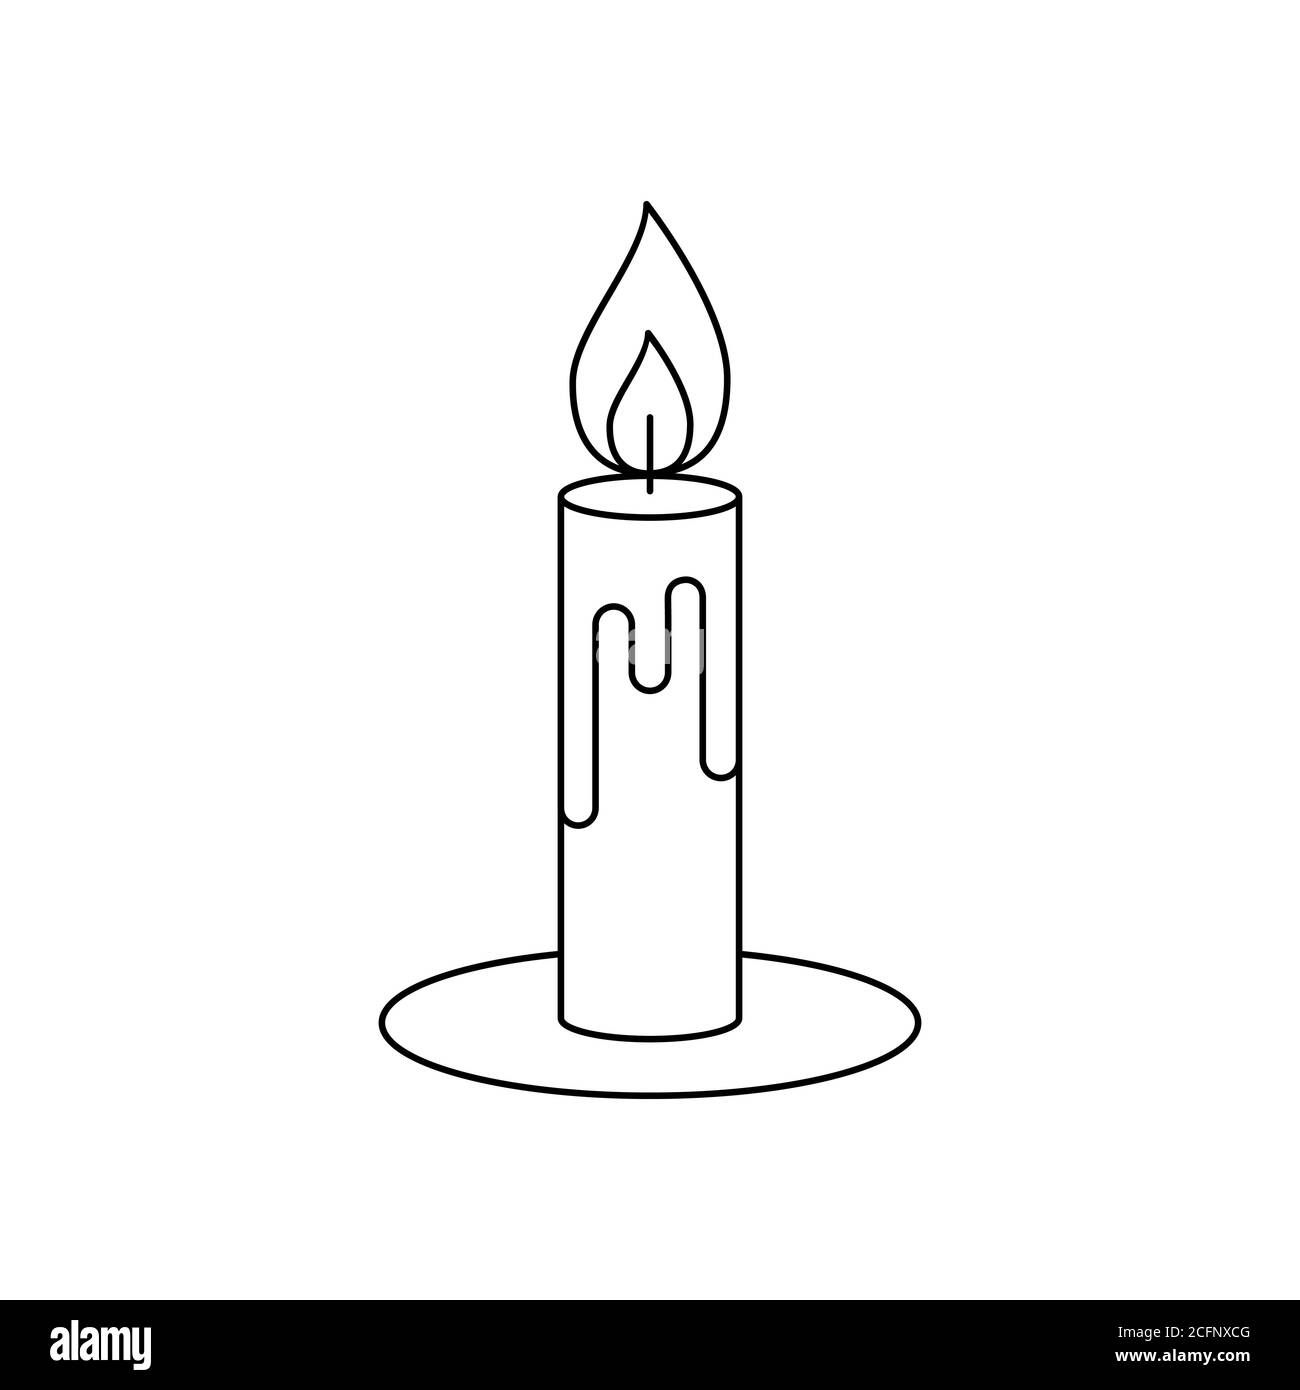 Candle line icon. Burning candle with melted wax. Christmas, Halloween, romantic concept. Candlelight with flame and wick. Thin black outline on white Stock Vector